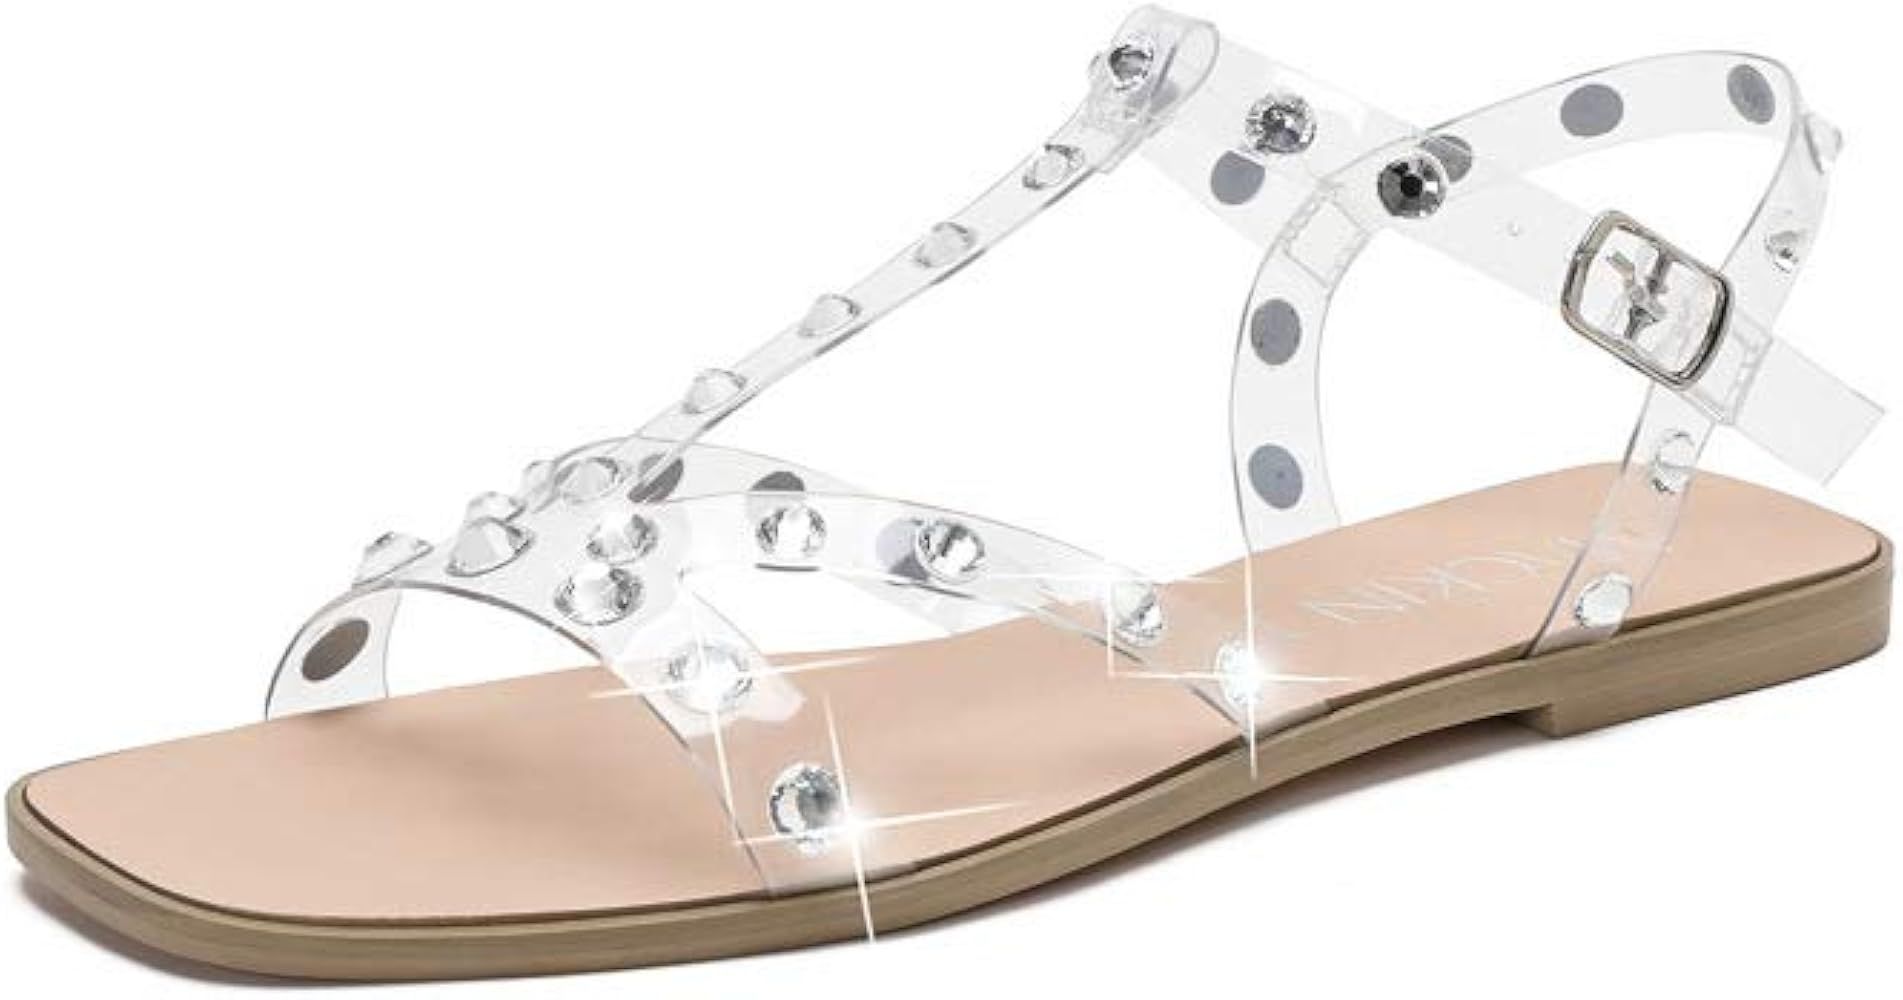 G323-4 Rhinestone Sandals Square Toe Ankle Strap Clear Flat Sandals | Amazon (US)